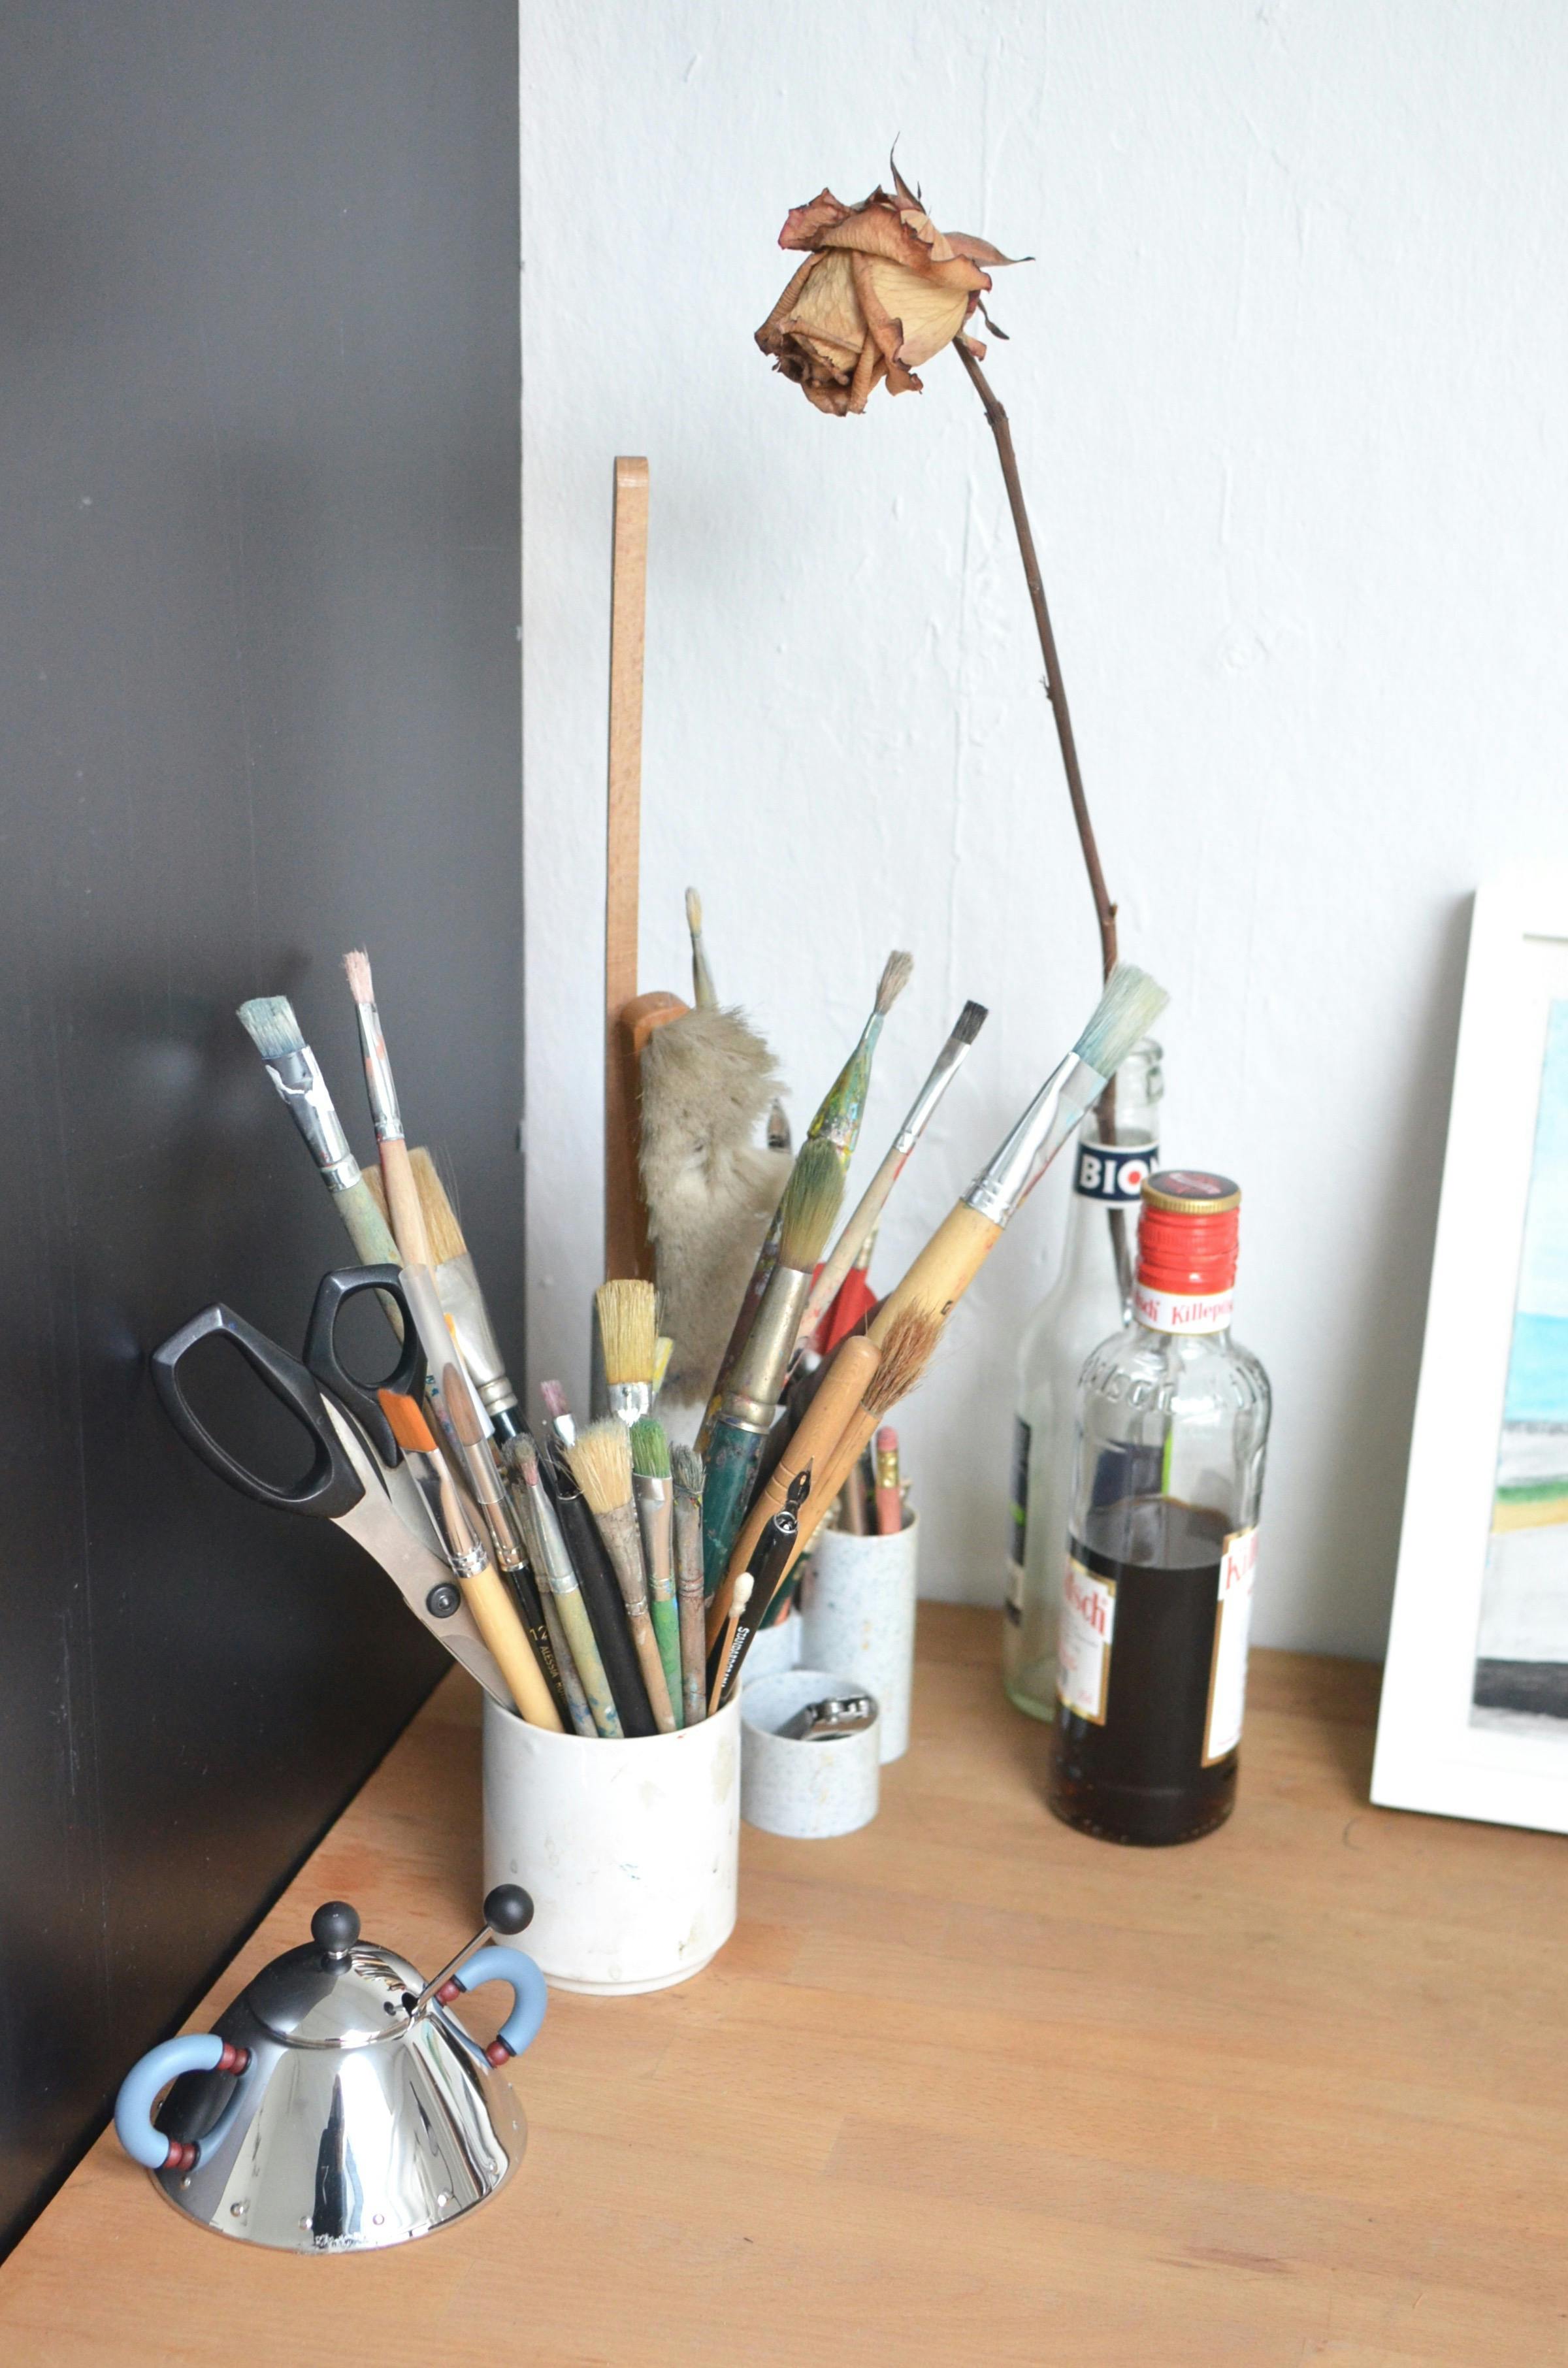 collection of paintbrushes and stationery placed on wooden desk in workshop